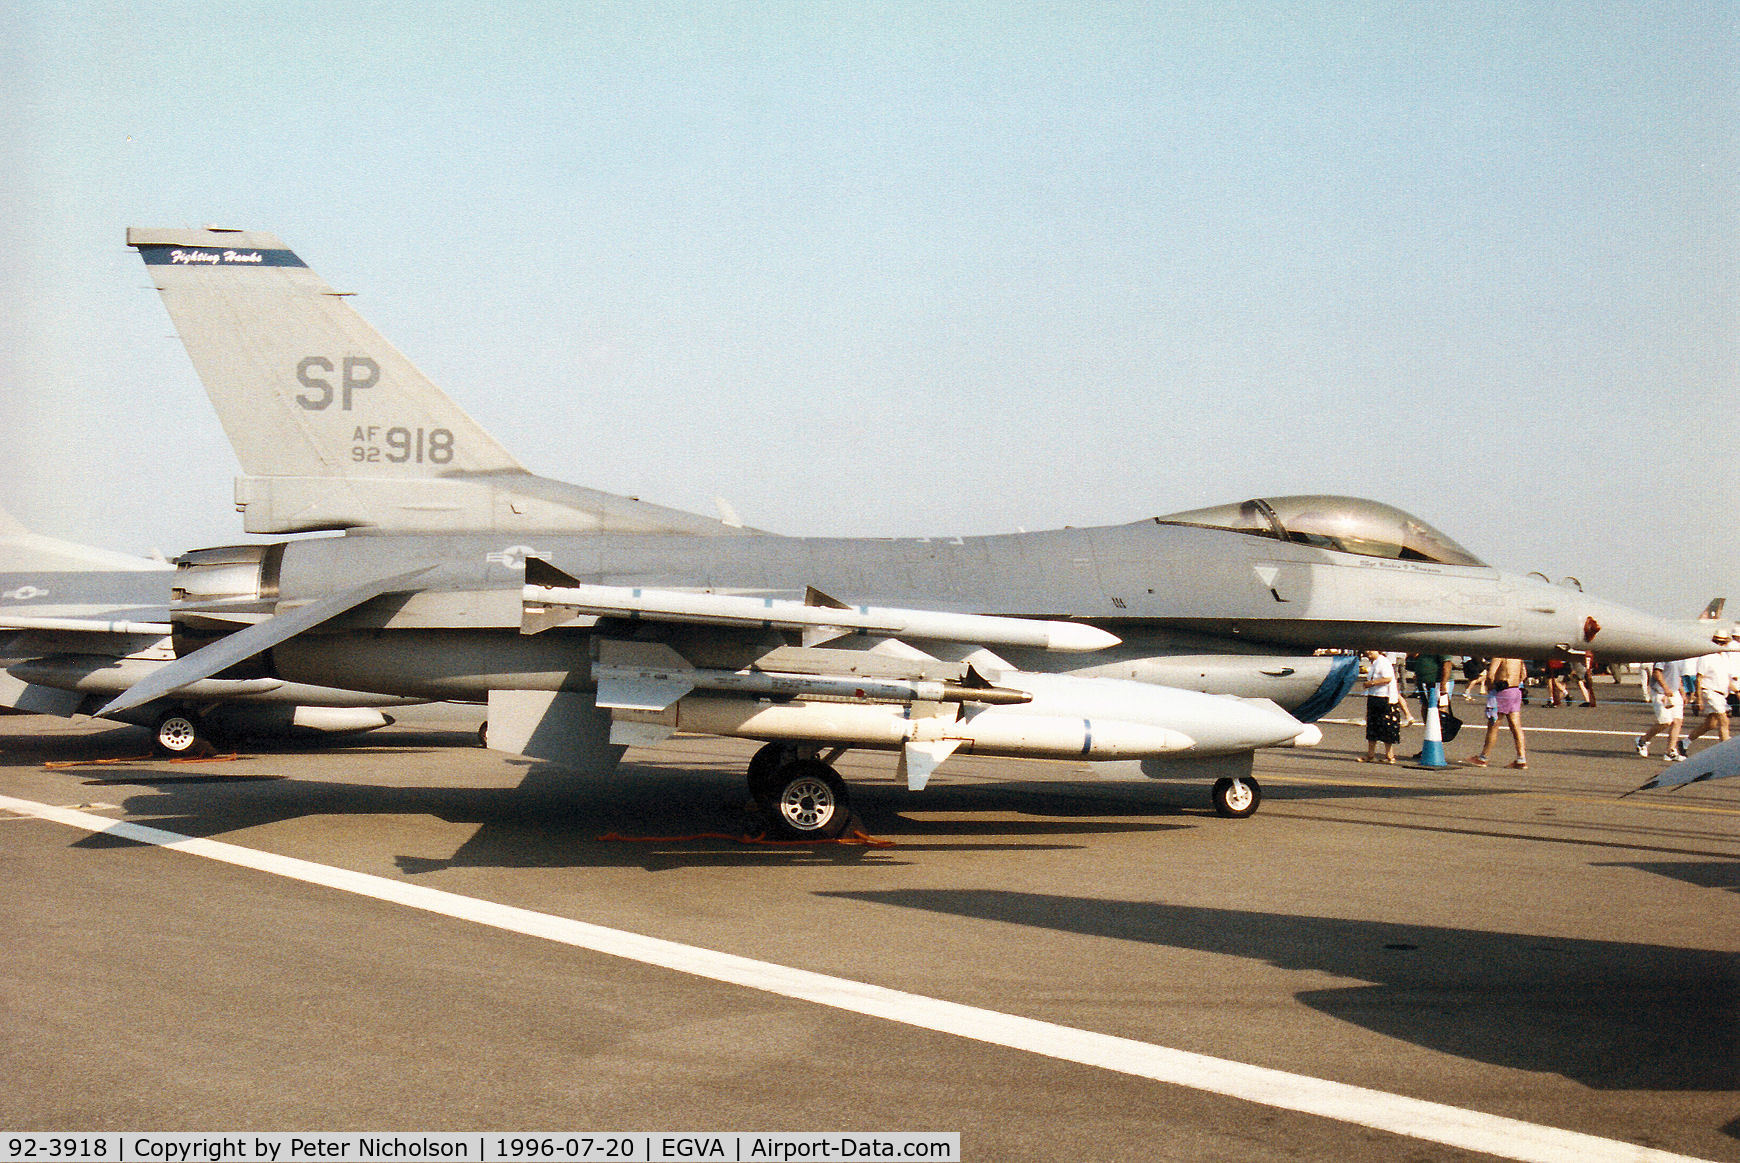 92-3918, 1992 General Dynamics F-16C Fighting Falcon C/N CC-160, F-16C Falcon of Spangdahlem's 23rd Fighter Squadron/52nd Fighter Wing on display at the 1996 Royal Intnl Air Tattoo at RAF Fairford.